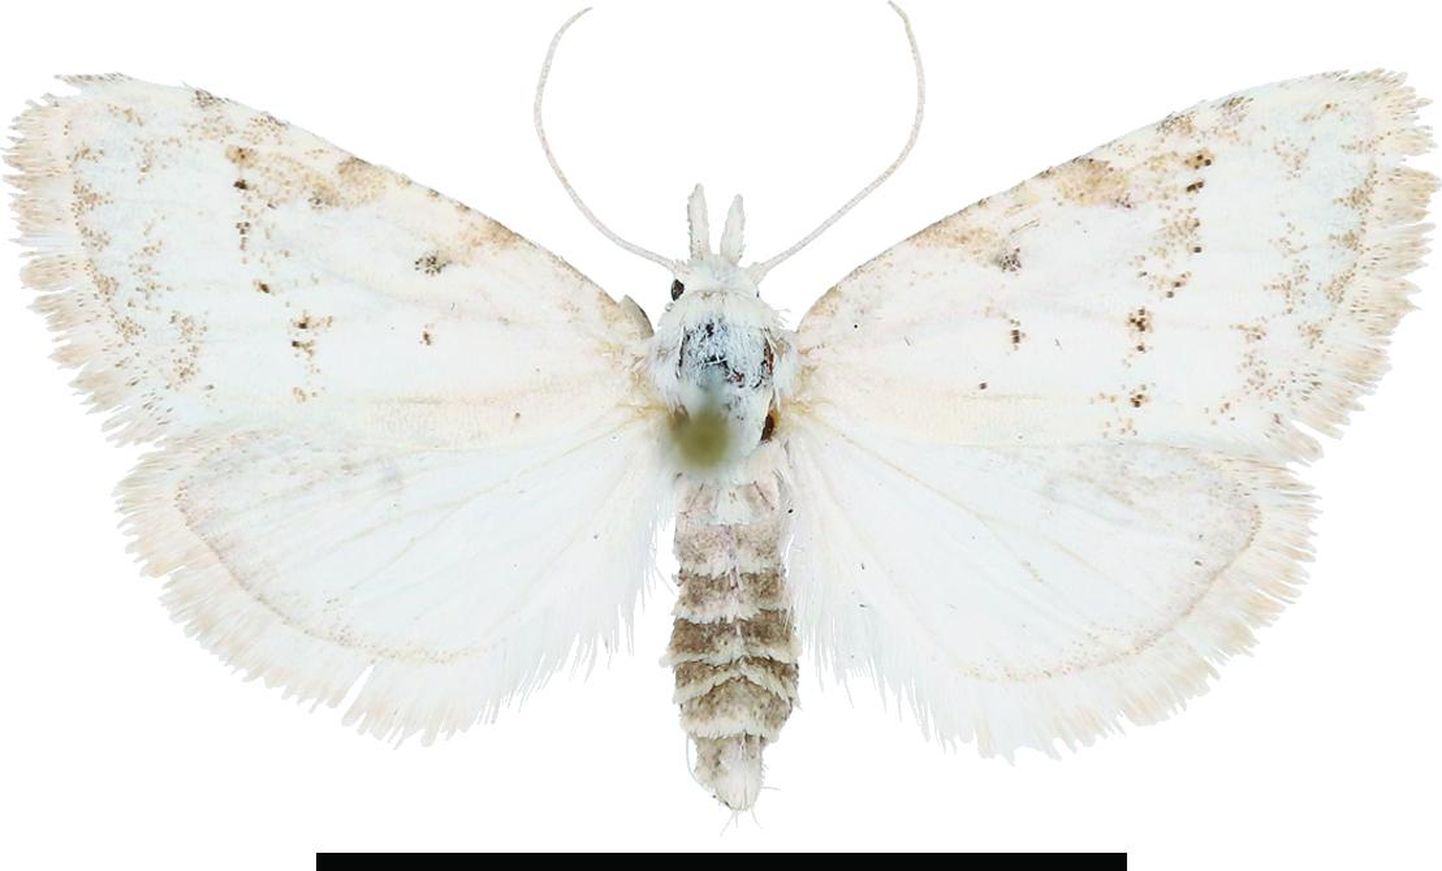 Scientific journal Zootaxa published an article last month describing a new species of moth discovered in Estonia and named Nola estonica.